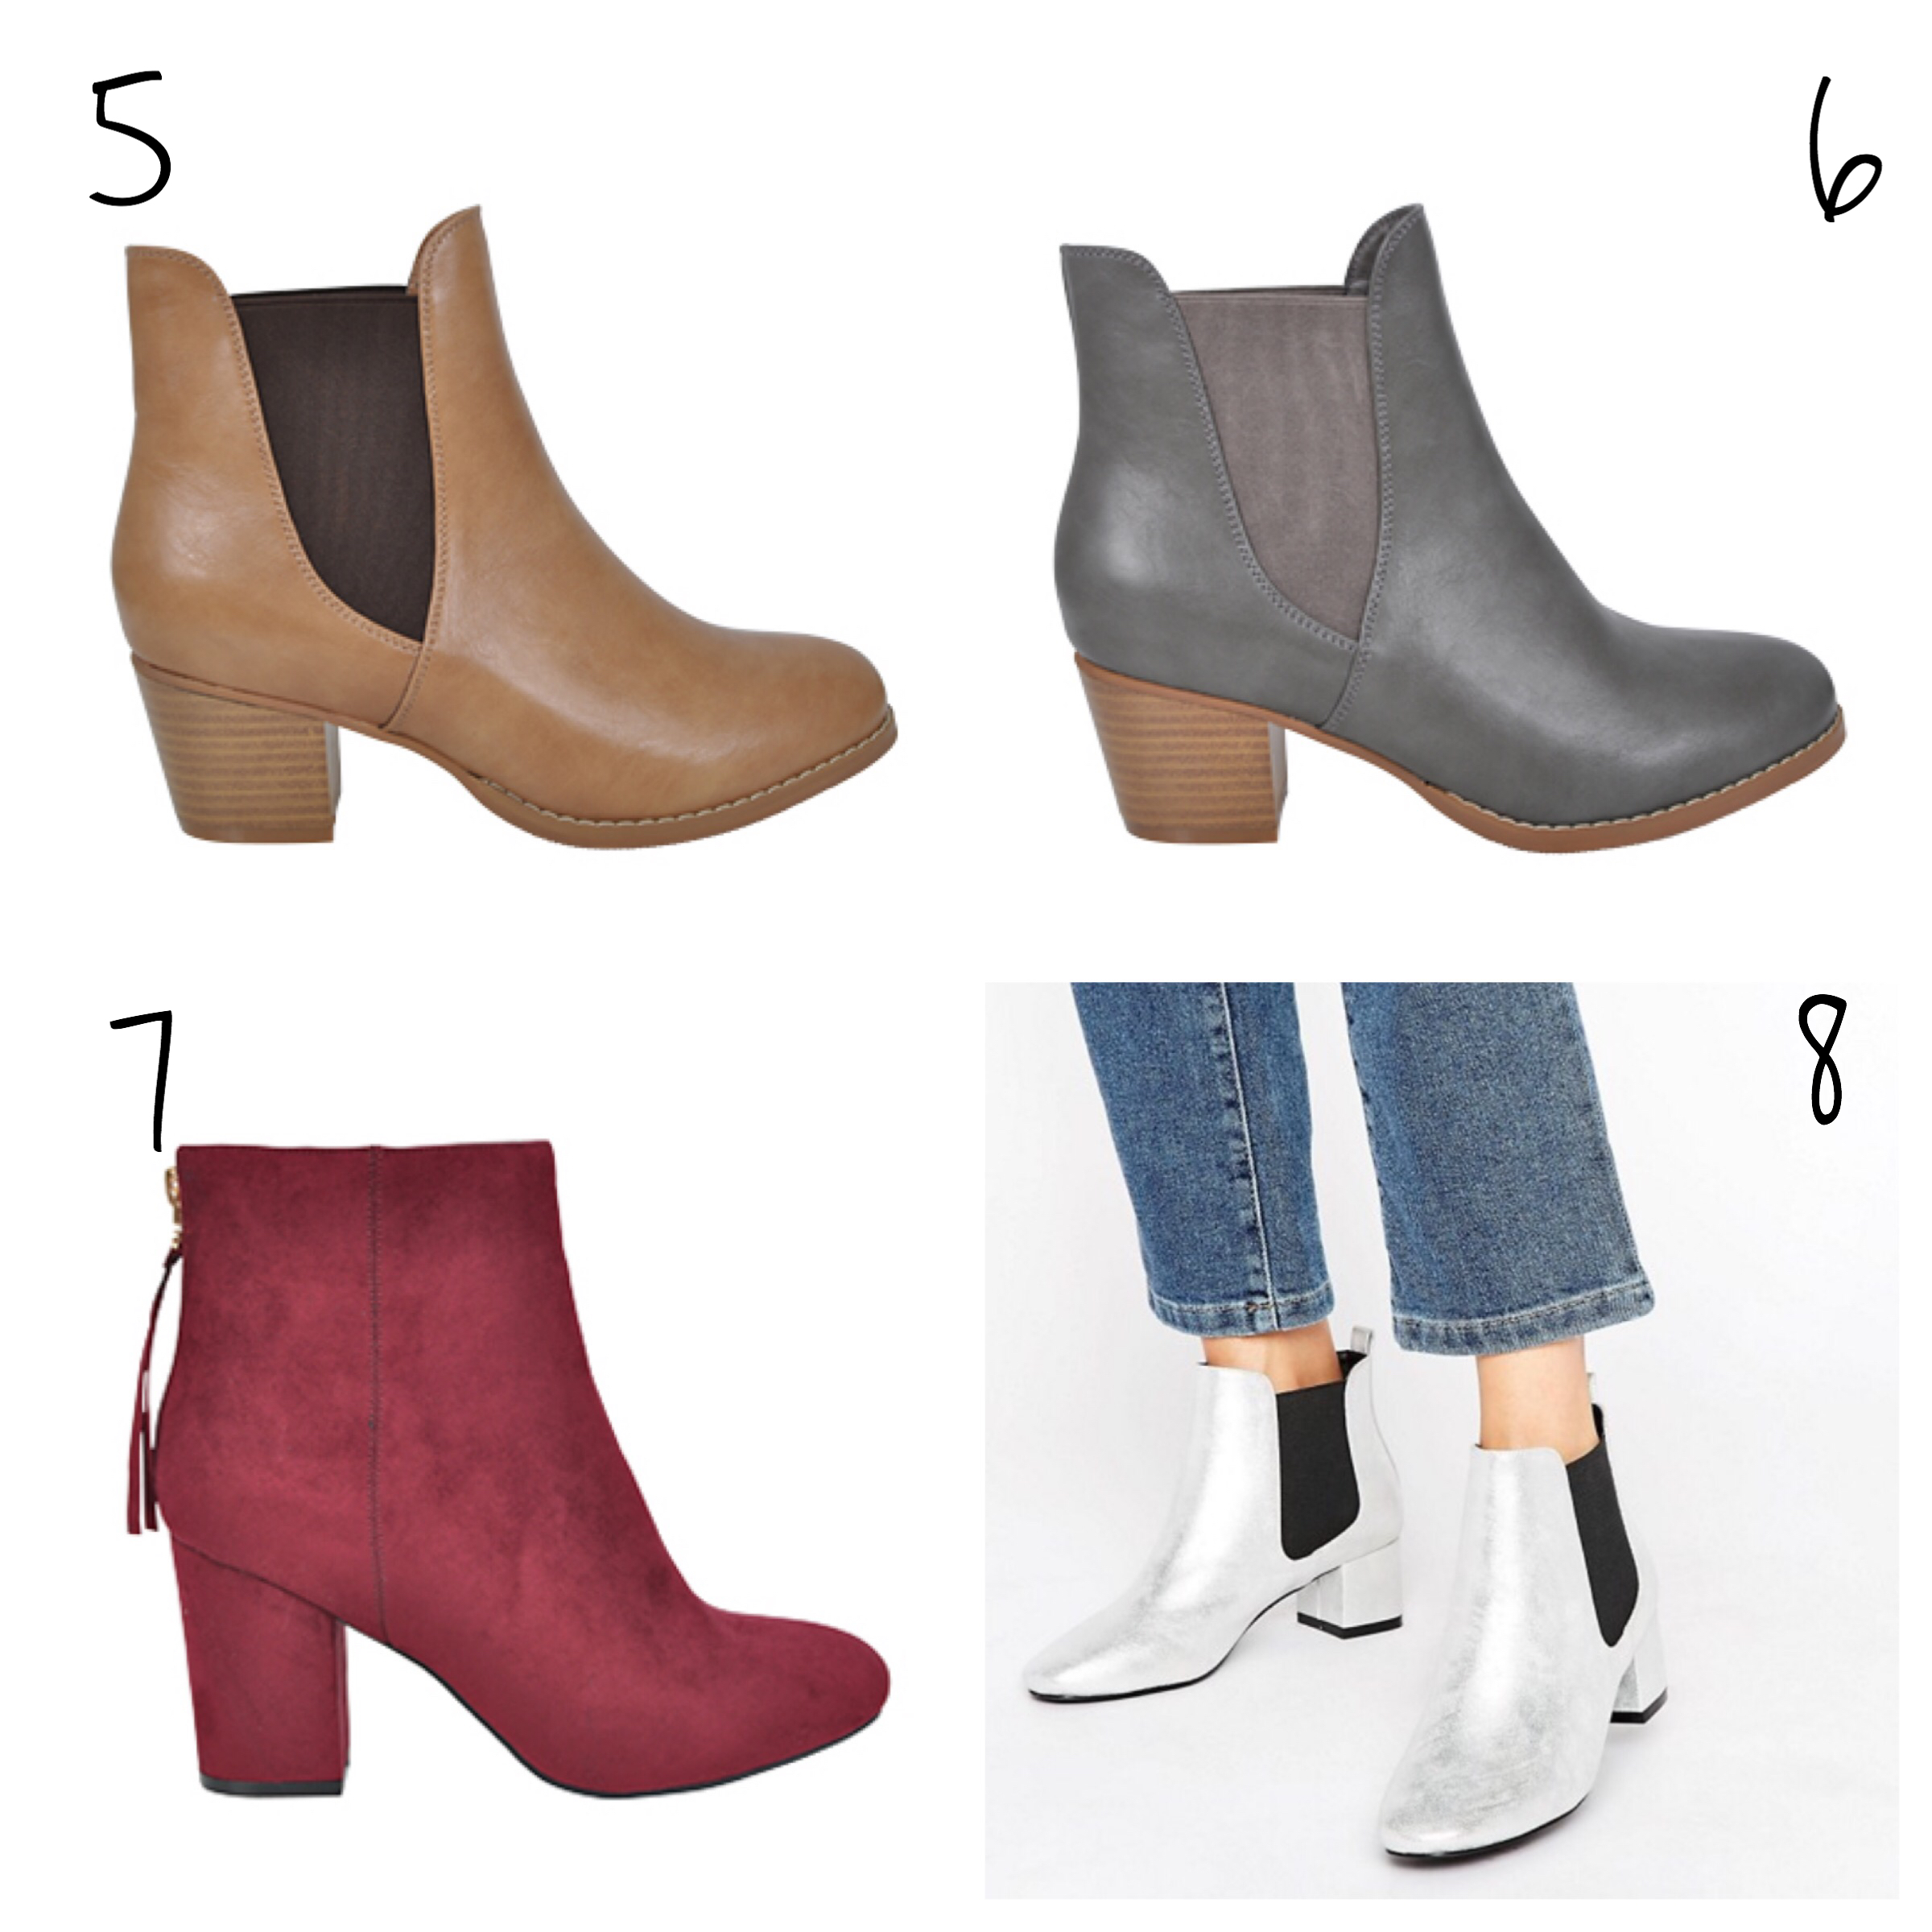 20 New Season Ankle Boots Under $100 | Trend Tuesday - Pretty Chuffed